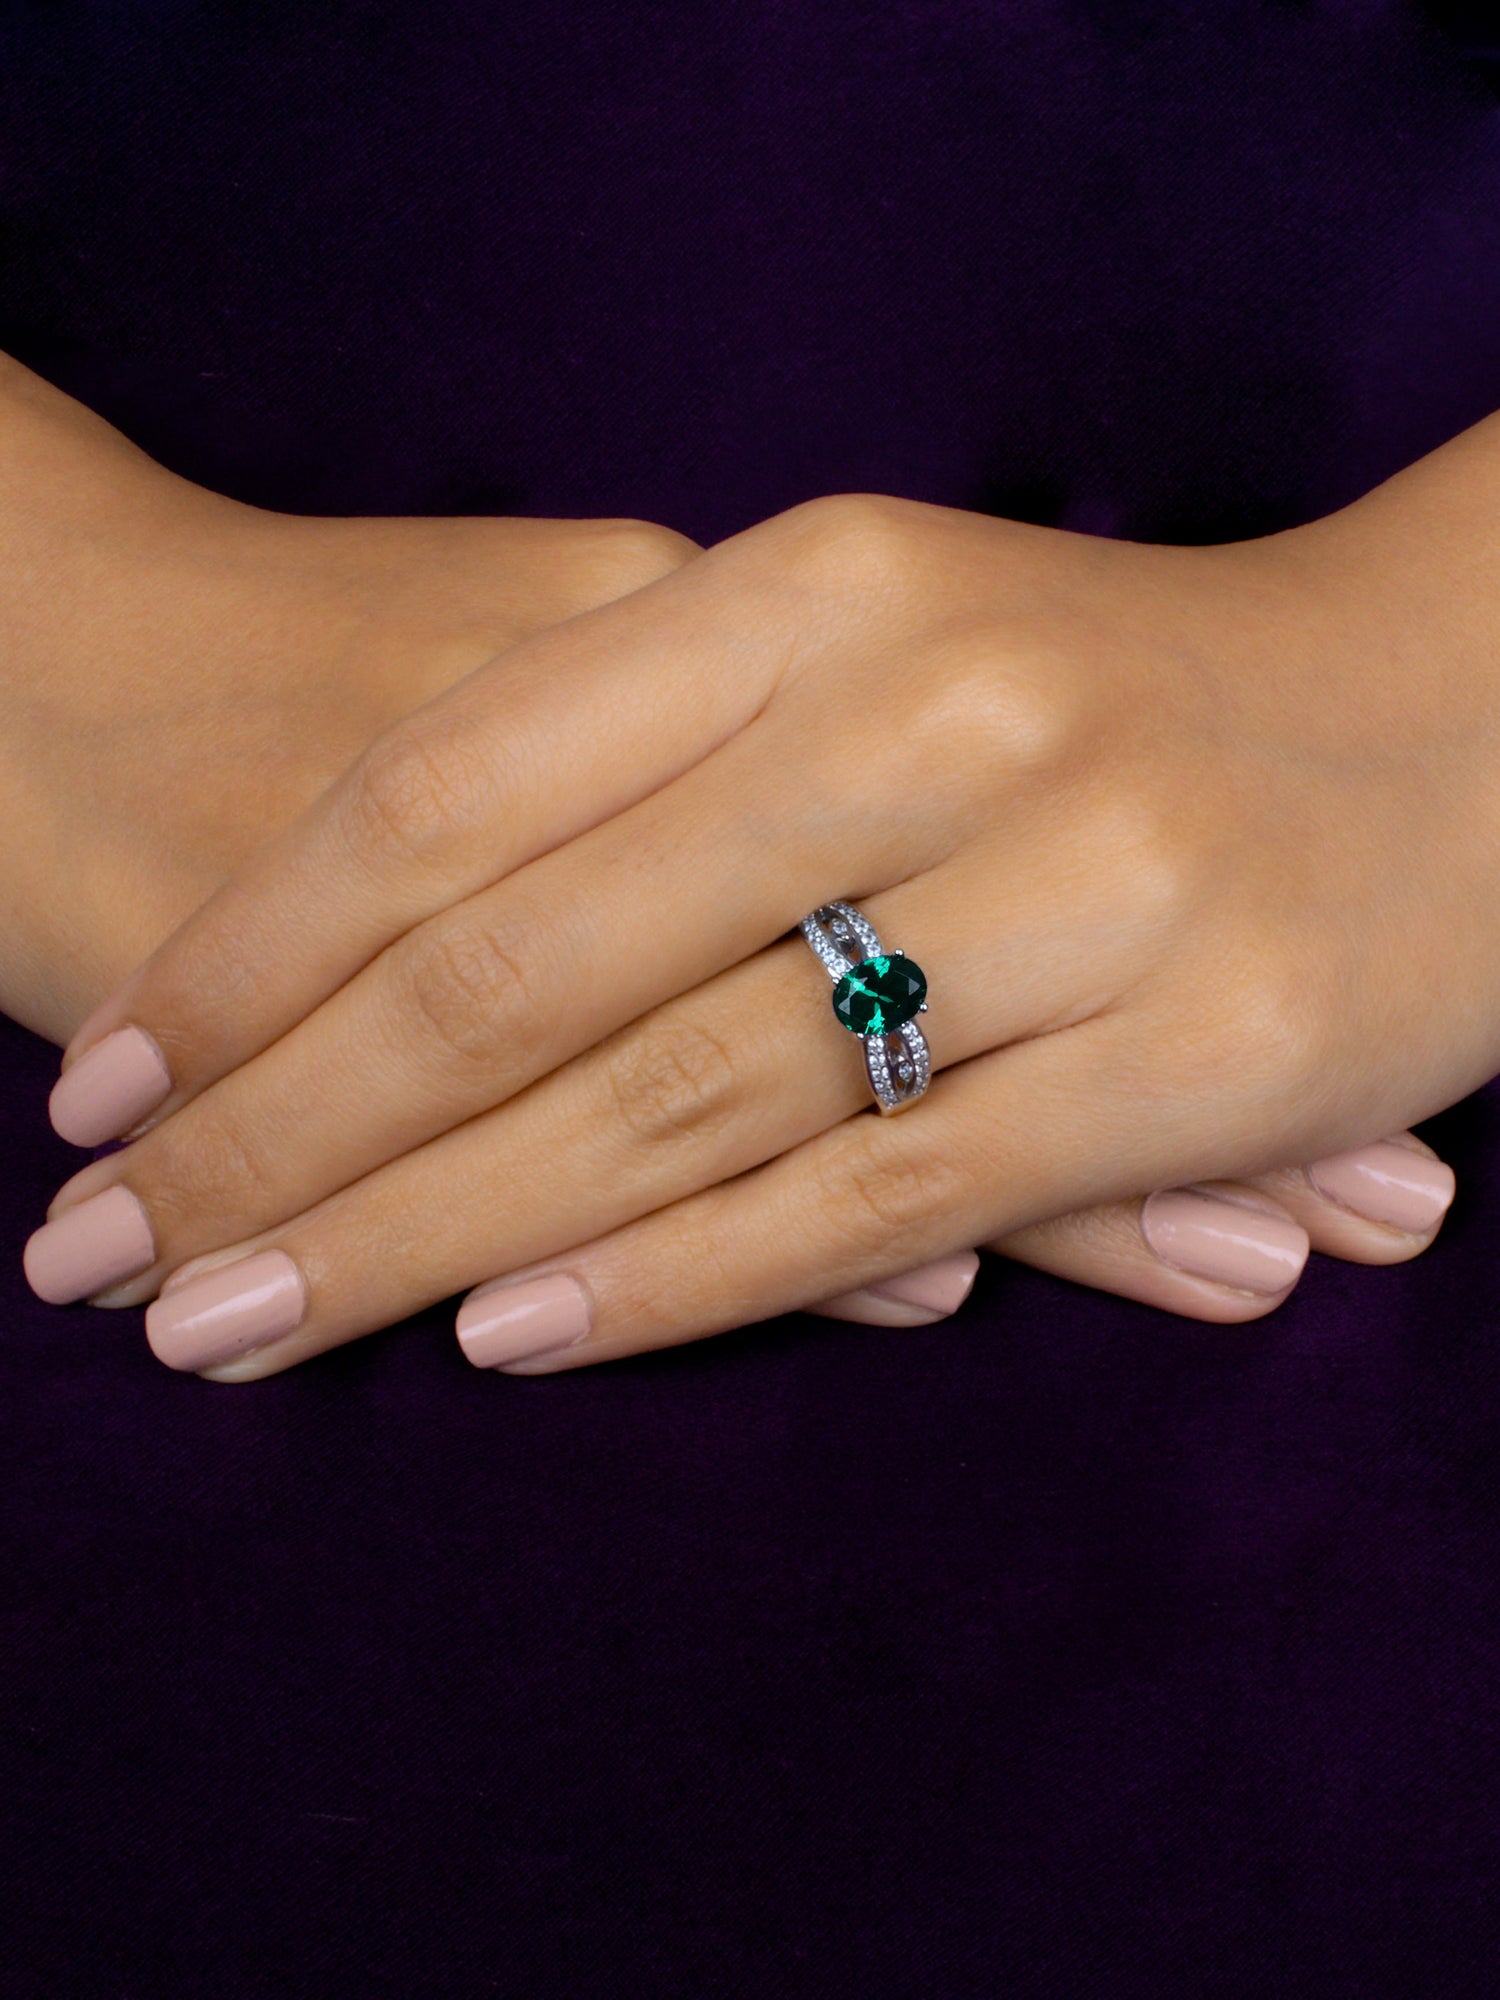 ORNATE EMERALD PROMISE RING IN SILVER